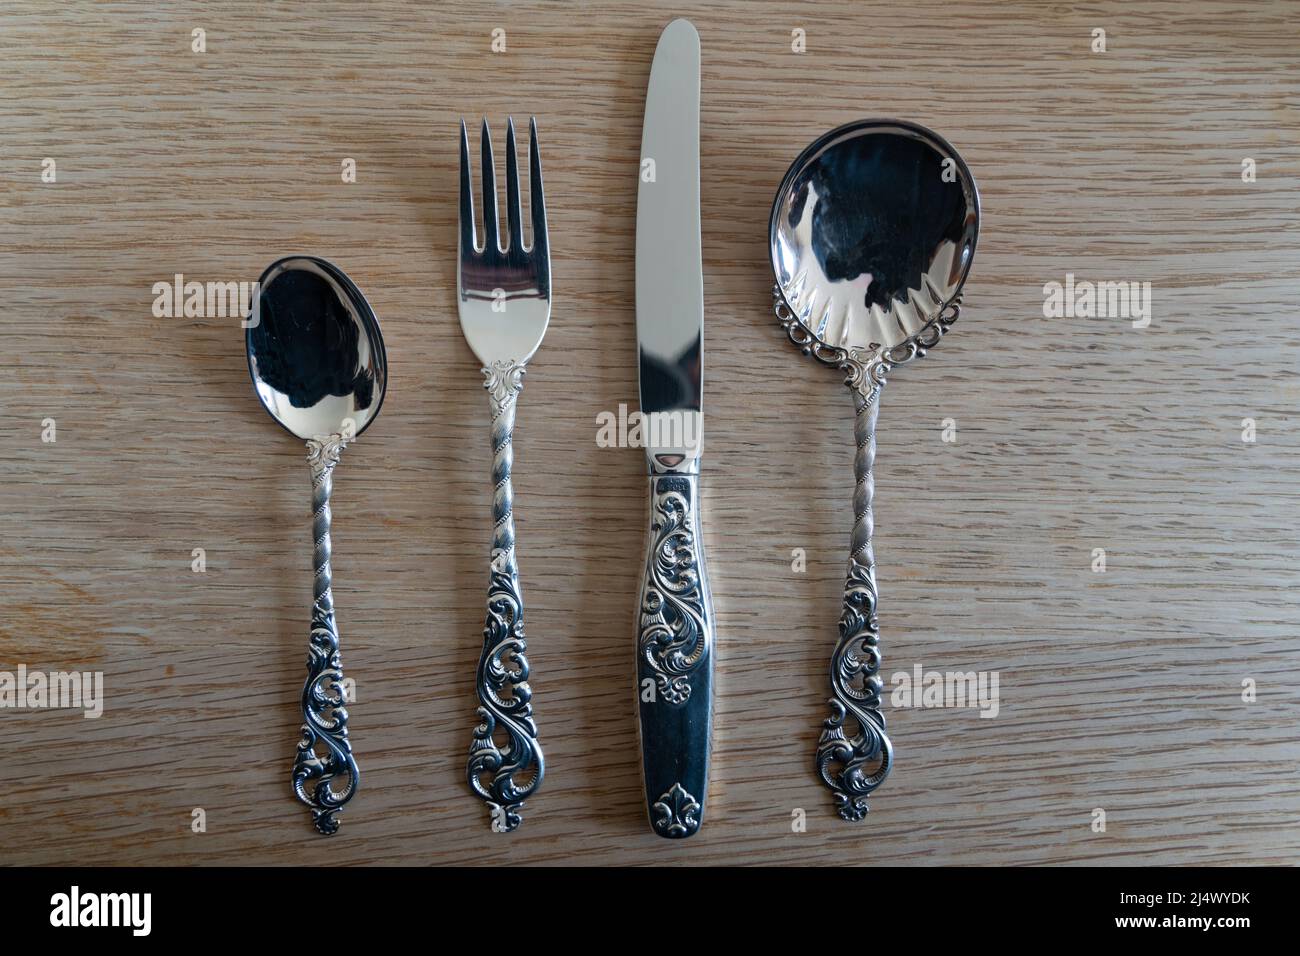 20 x 30 x 25 cm Judge Table Spoon Stainless Steel Silver